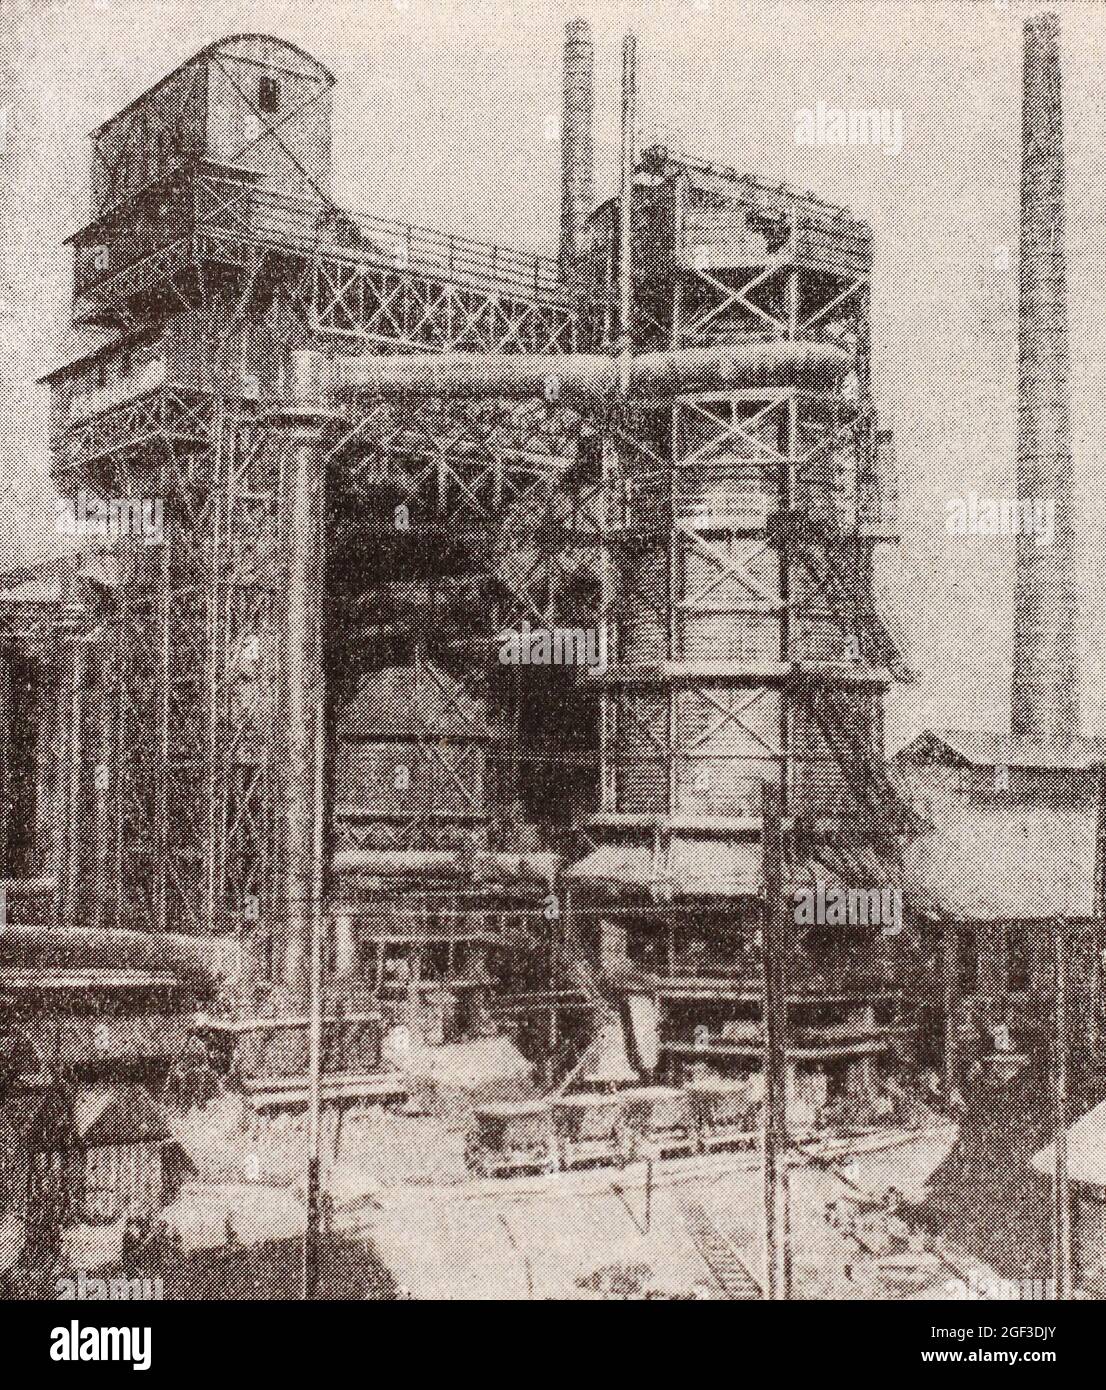 A blast furnace at a metallurgical plant in Kladno. Photo of the late 19th century. Stock Photo